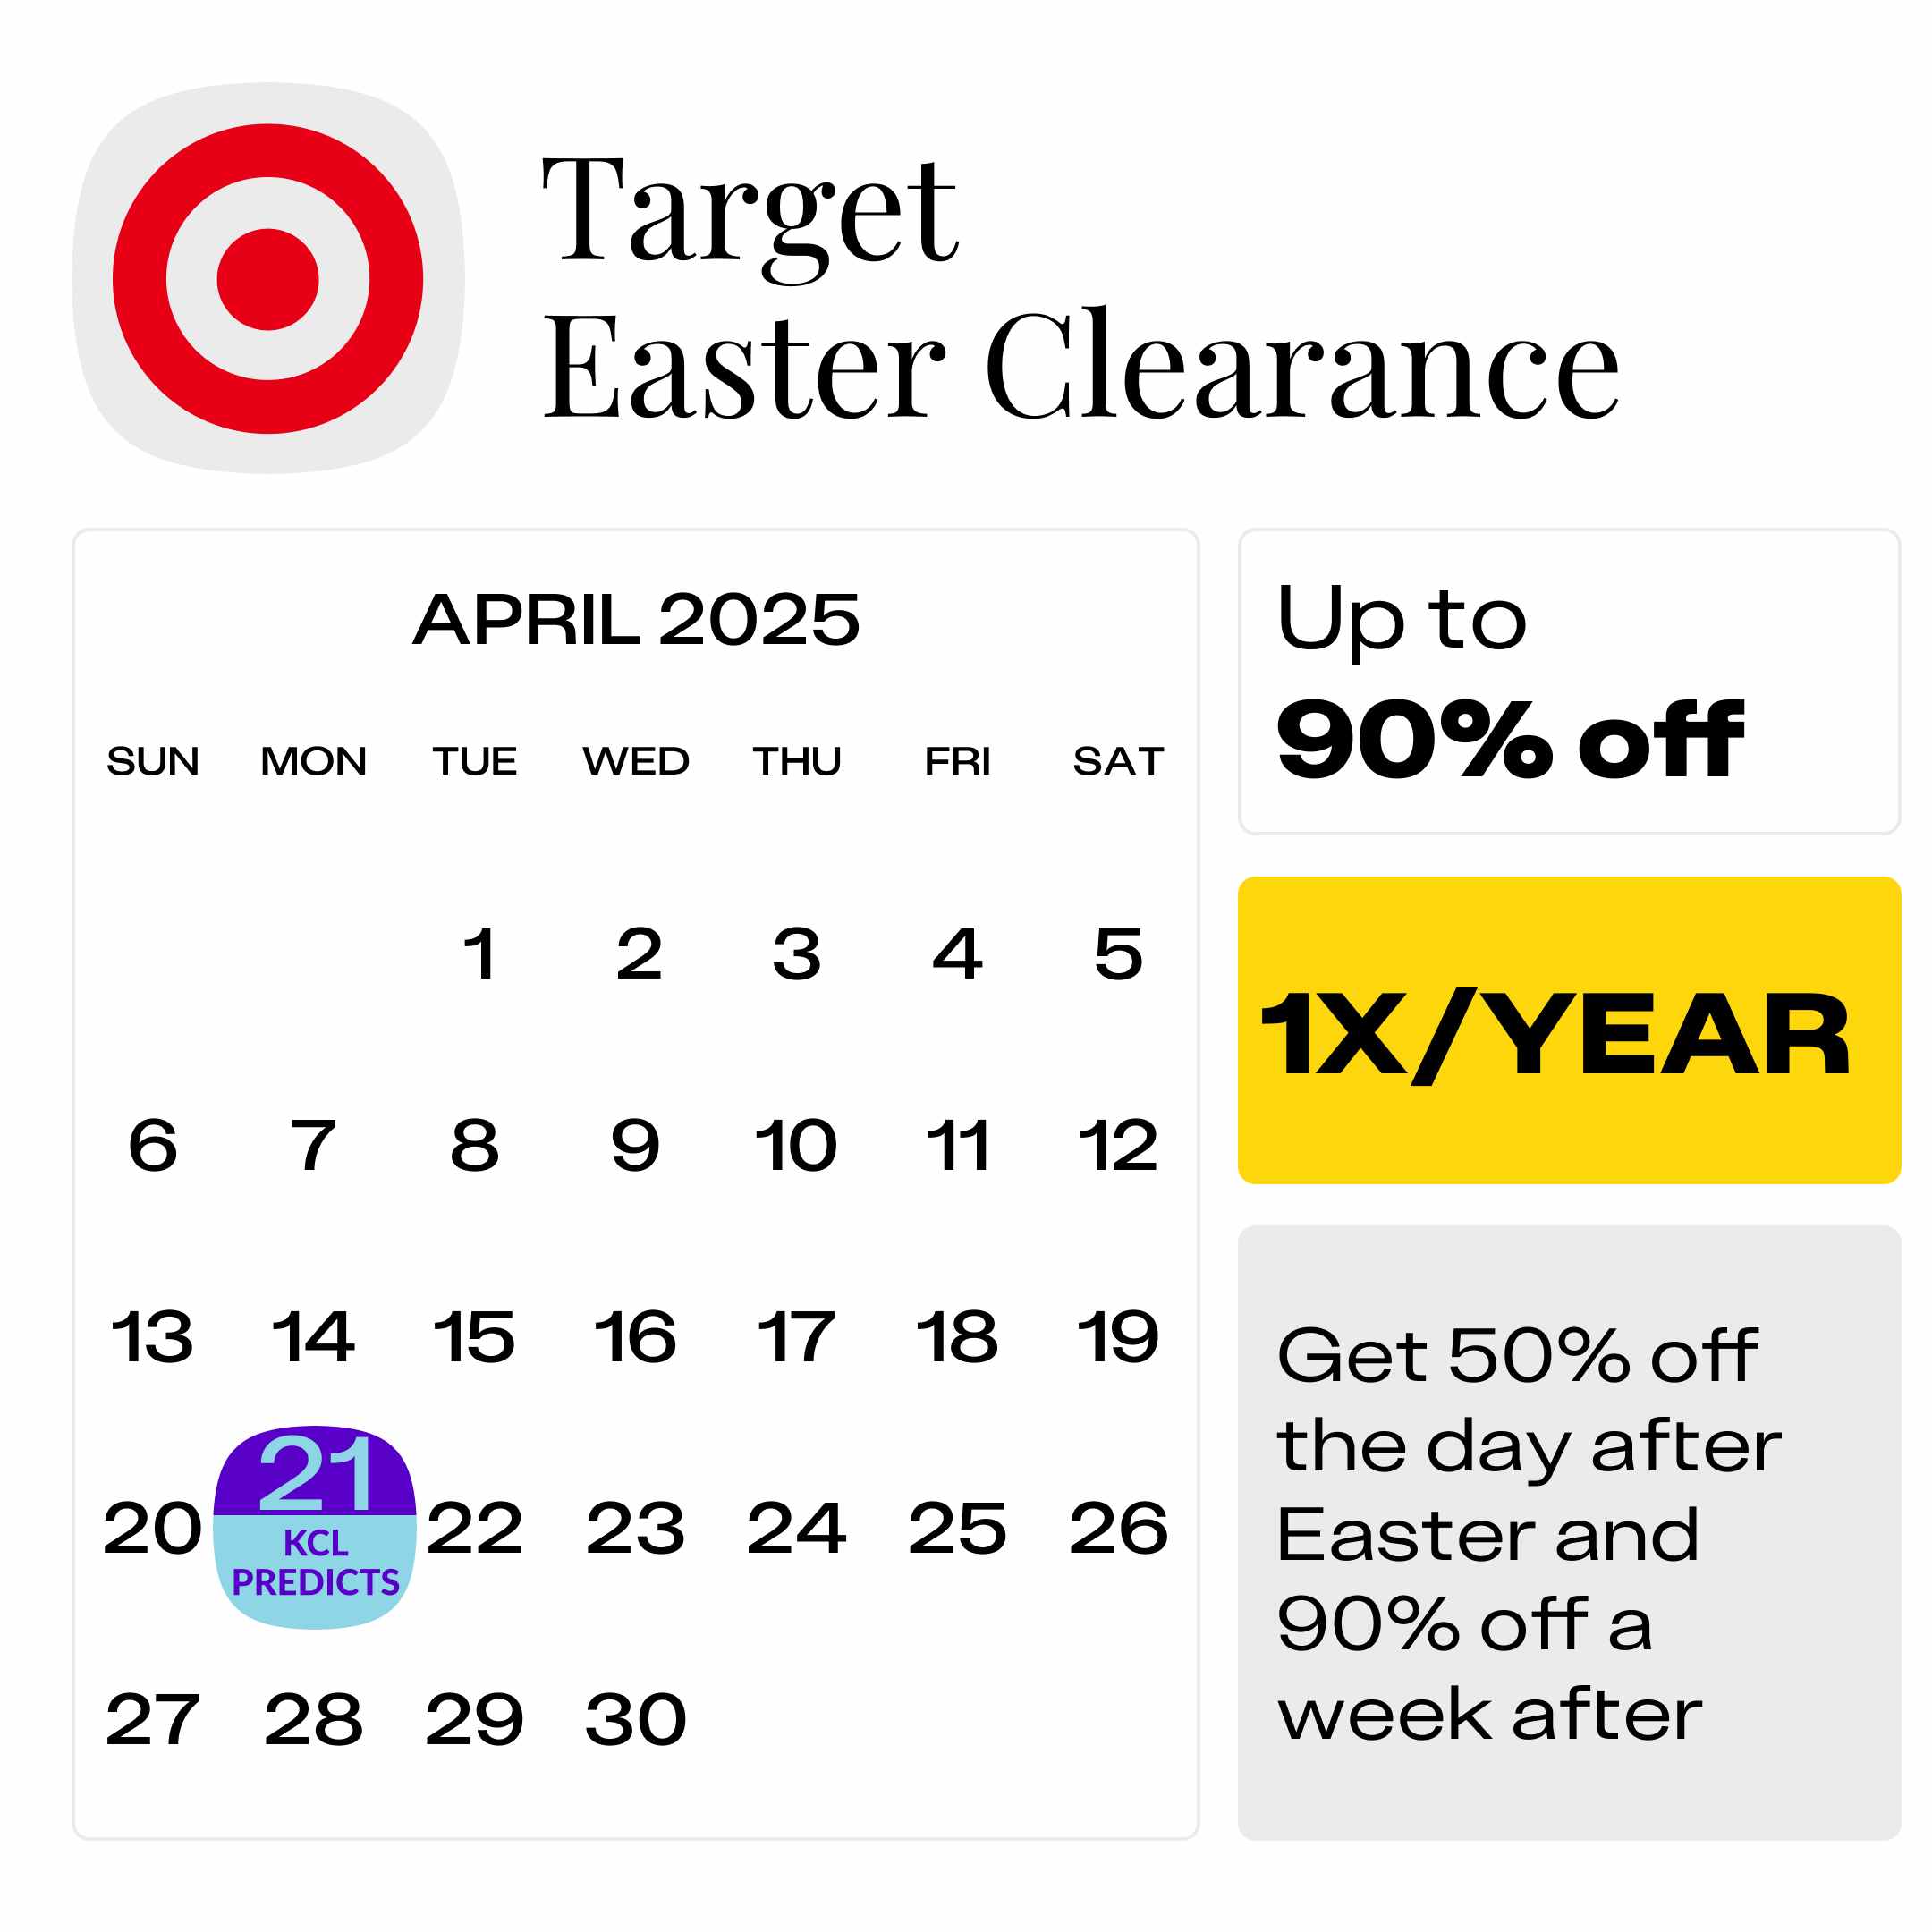 Target-Easter-Clearance